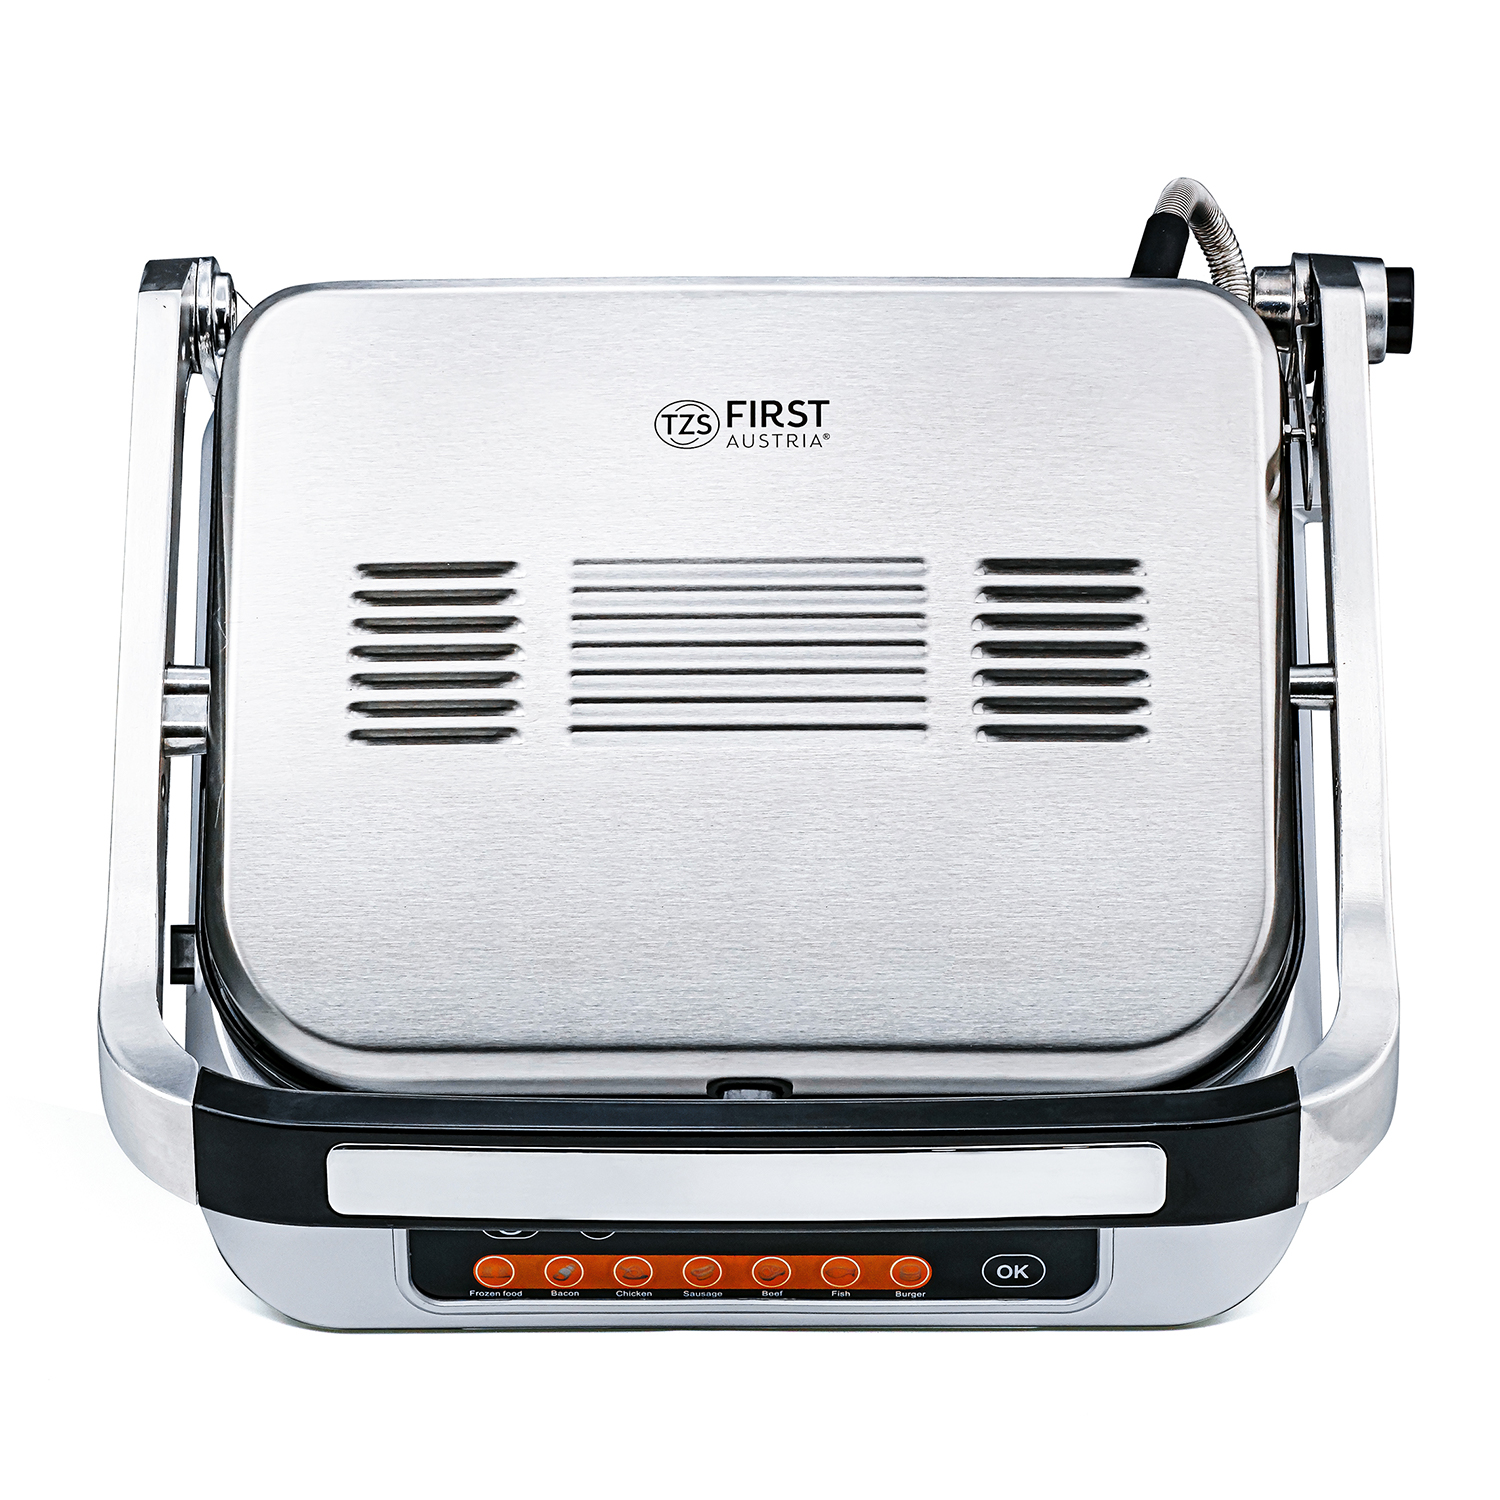 Table grill | 1200 Watt | removable plates